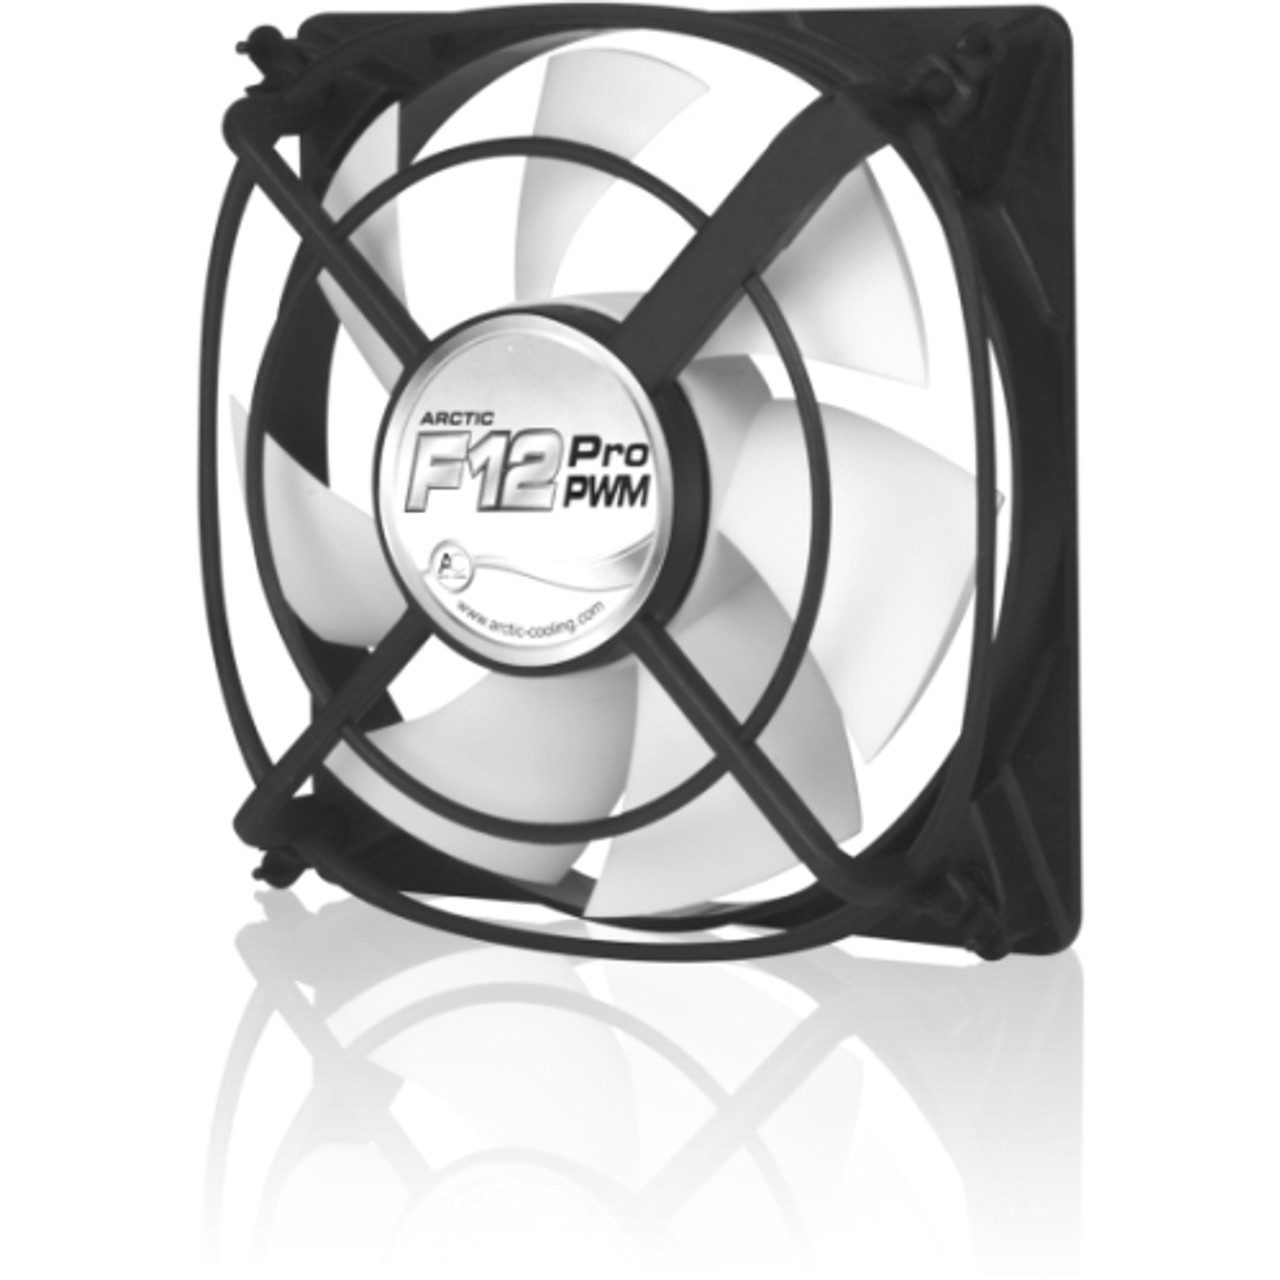 AFACO-09PP0-GBA01 Arctic Cooling Arctic F9 Pro Pwm 92mm Case Fan